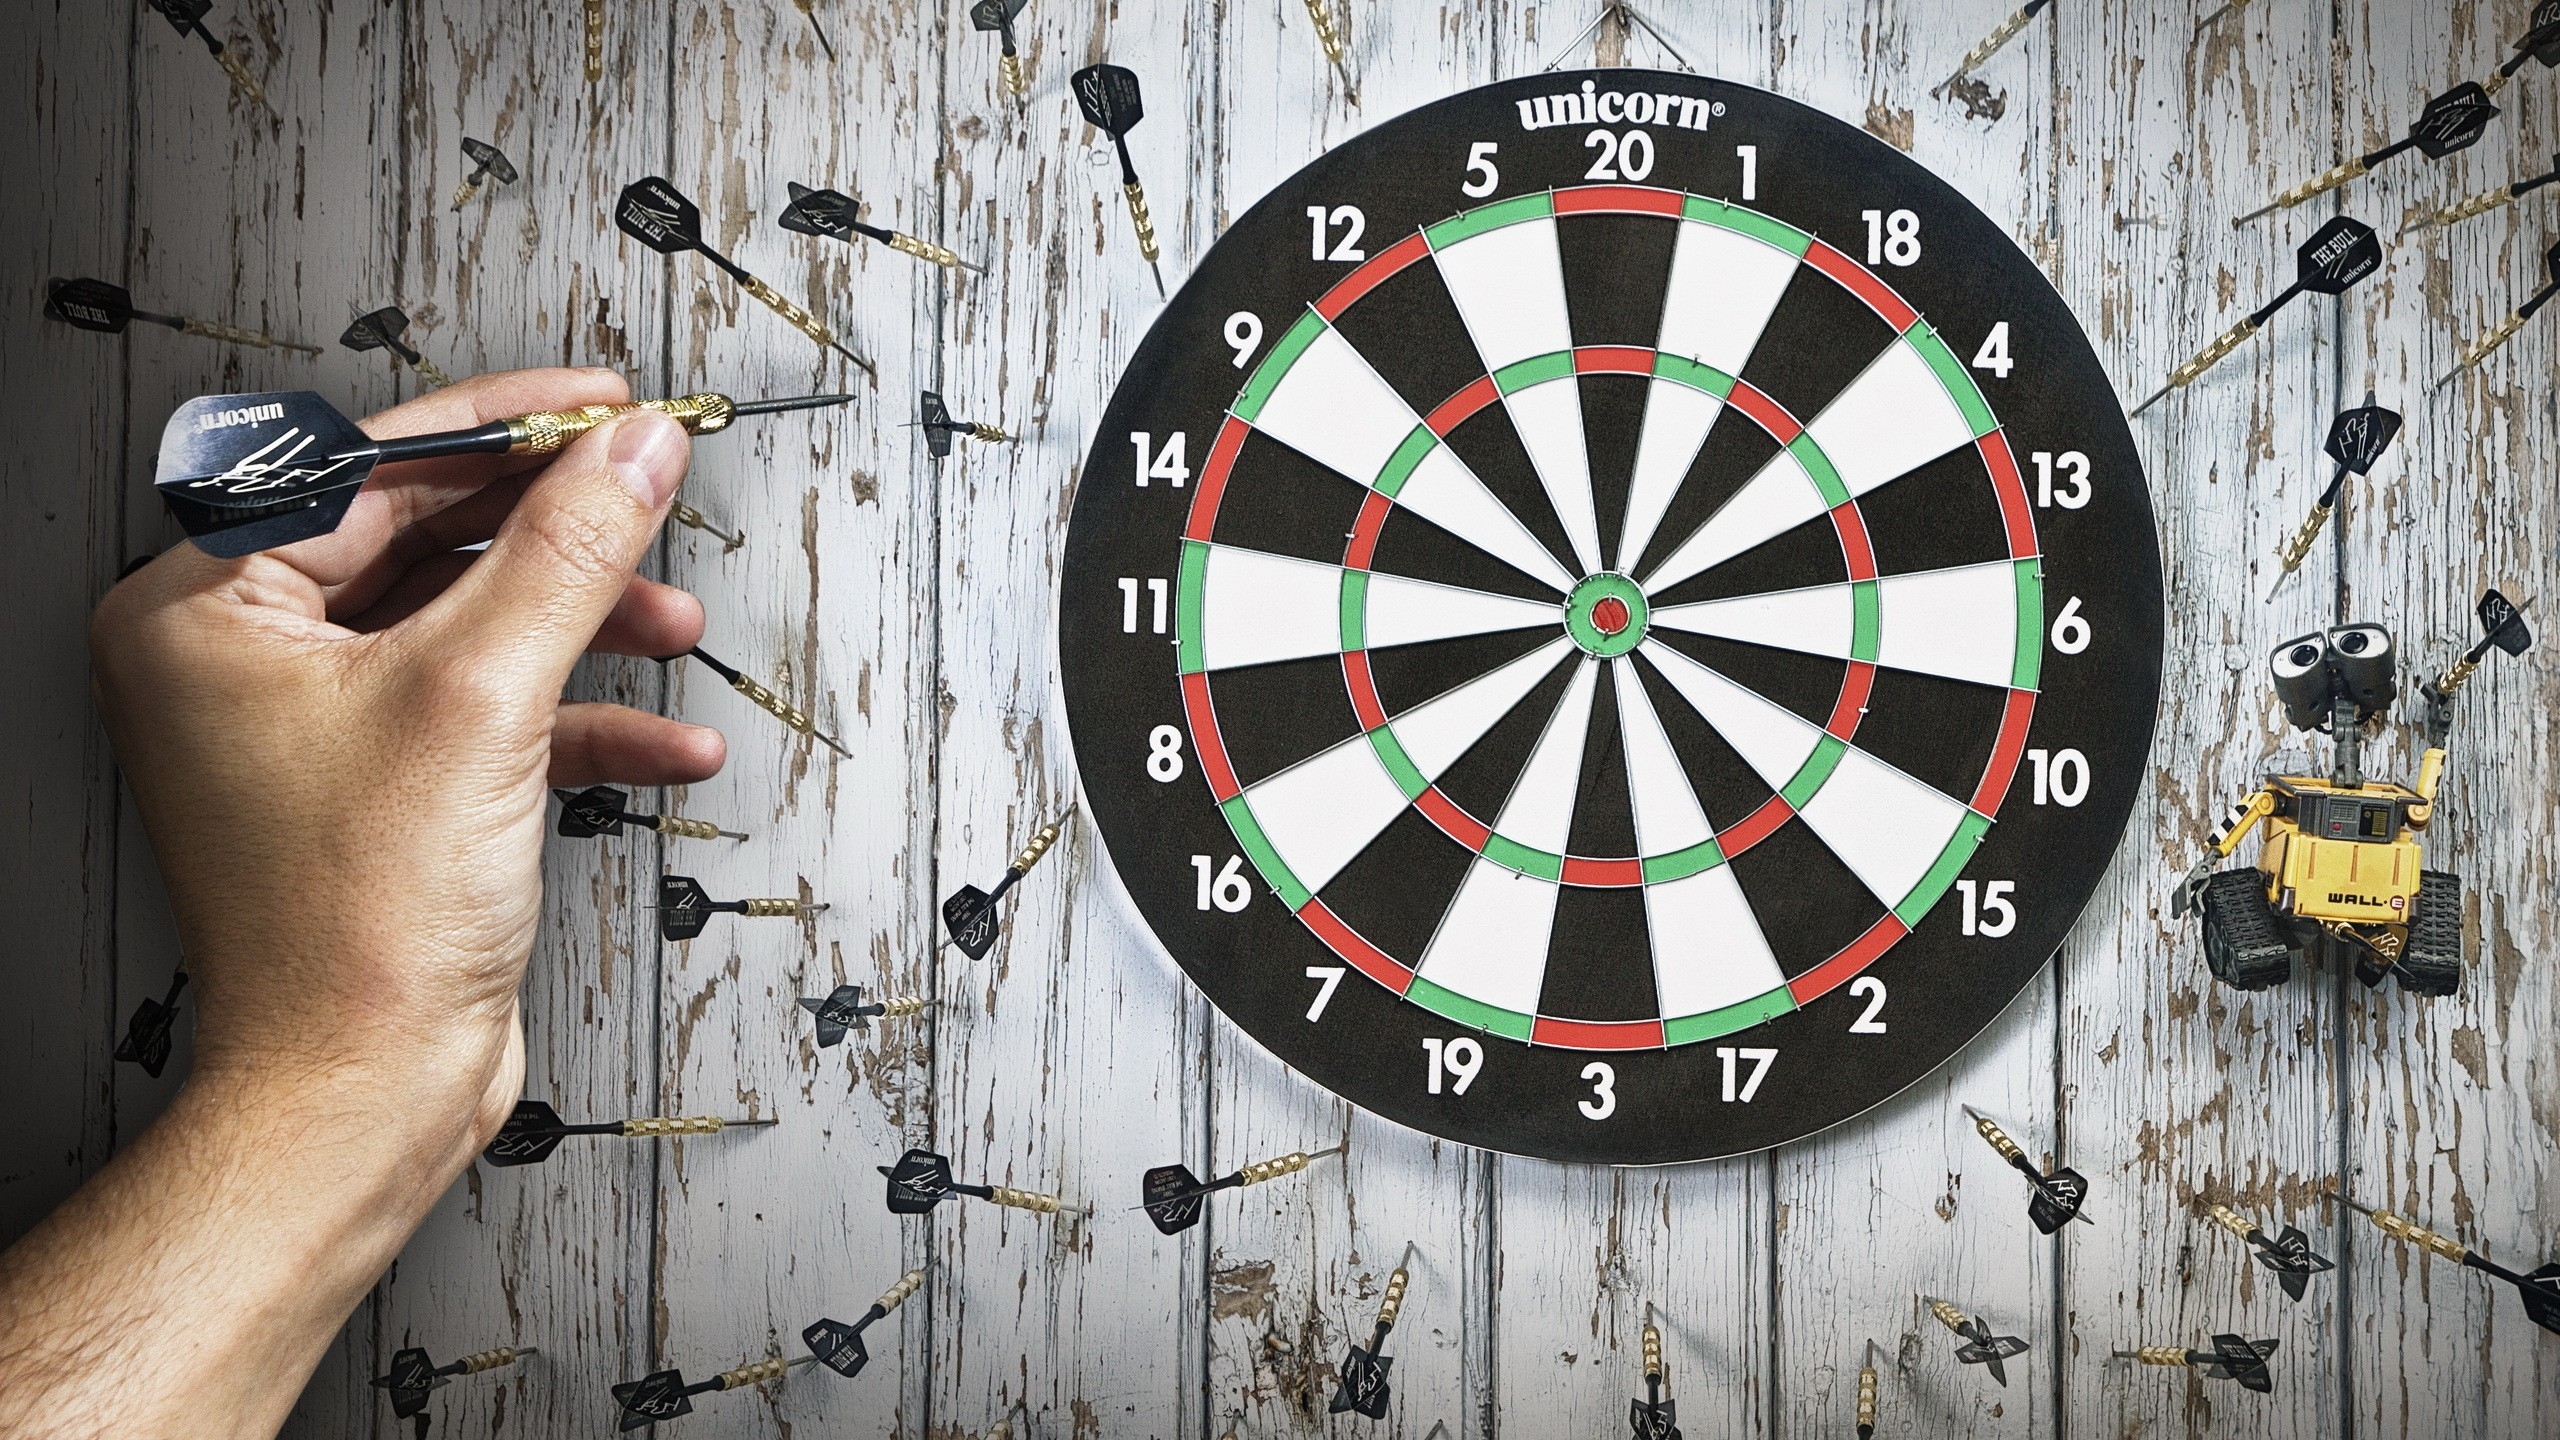 Darts Game for 2560x1440 HDTV resolution